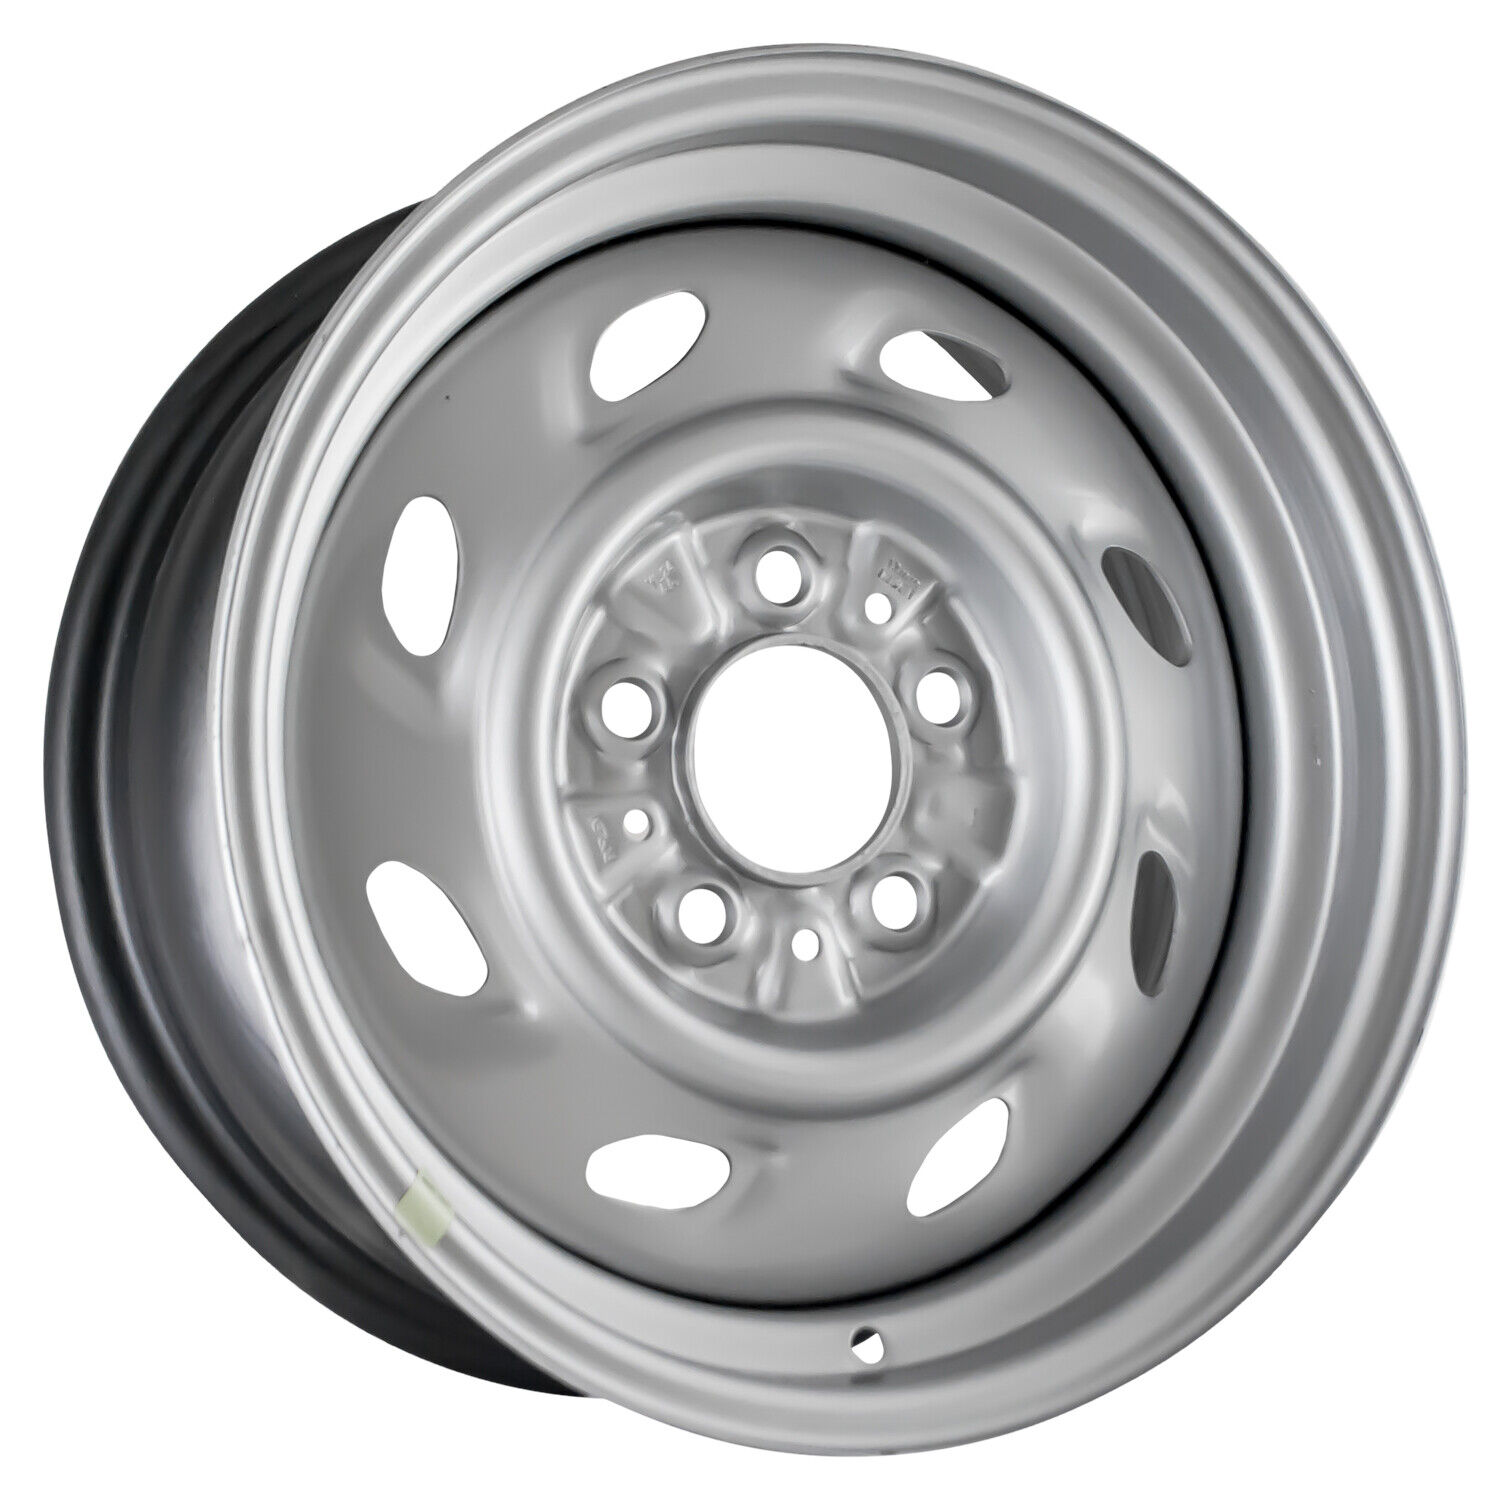 03070 COMPATIBLE New Silver Steel Wheel Rim 15in Fits Ford Ranger 1993-2009